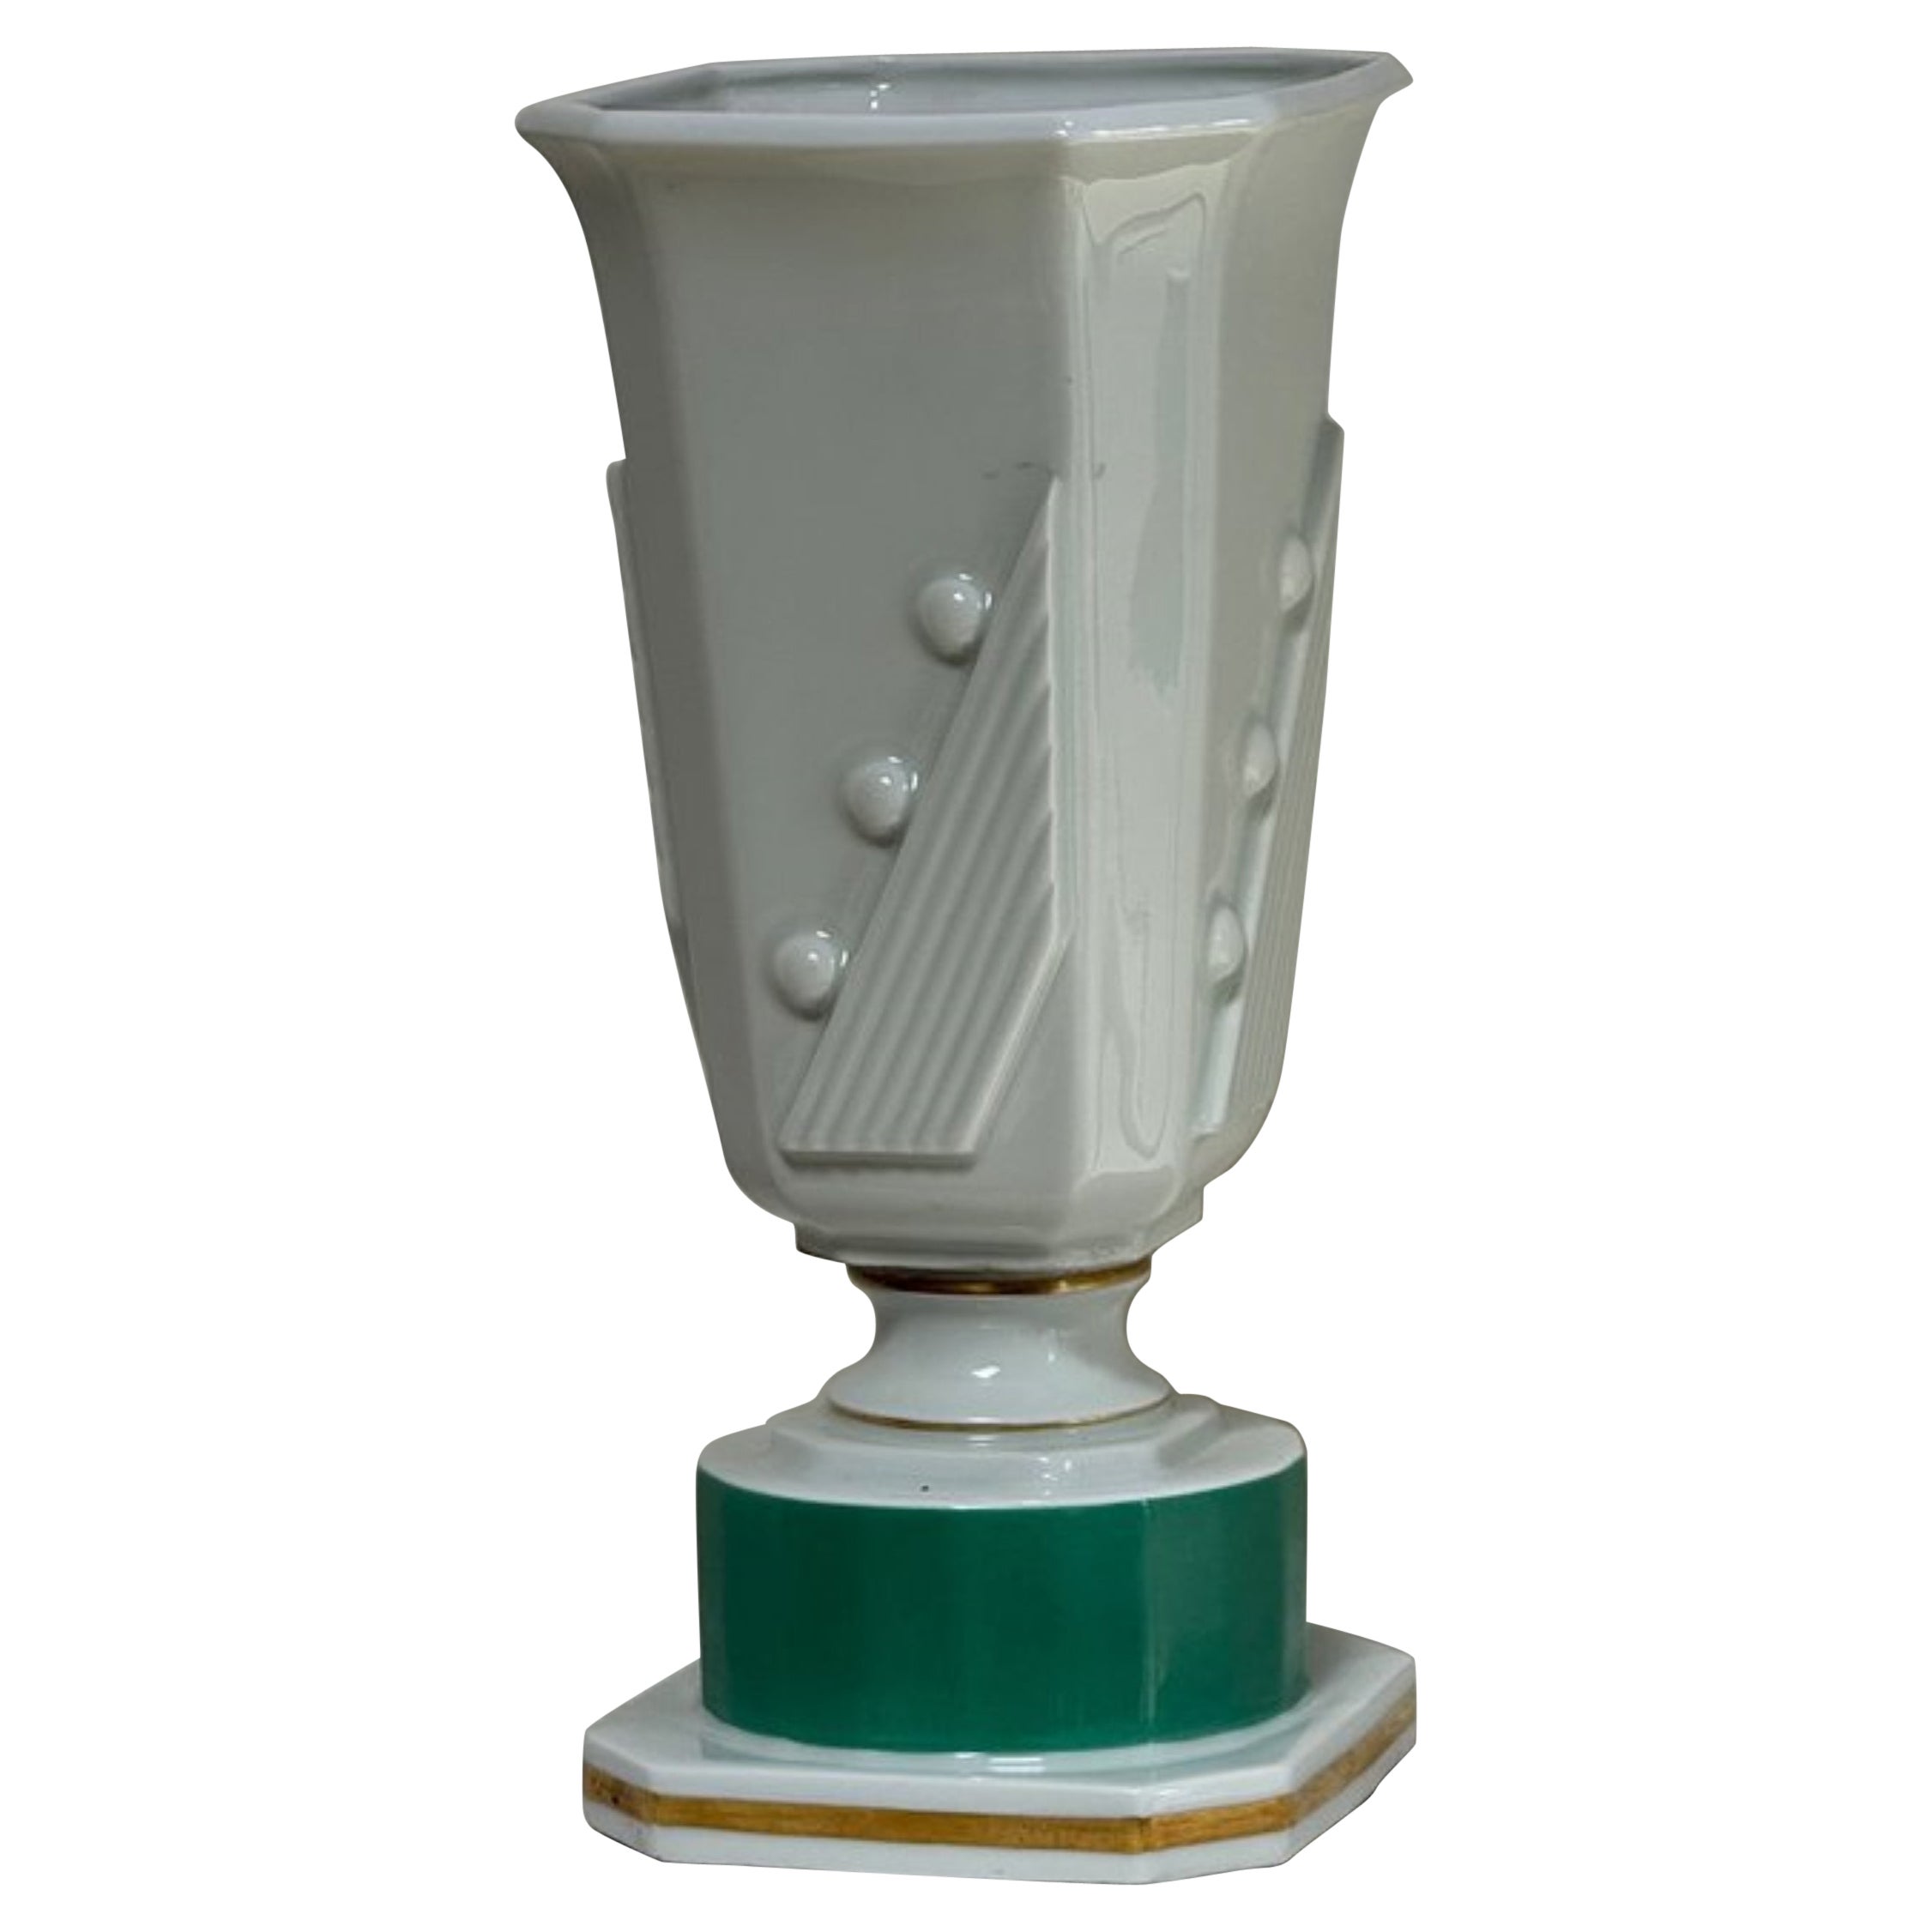 Vintage Art Deco Green And White Ceramic Lamp For Sale